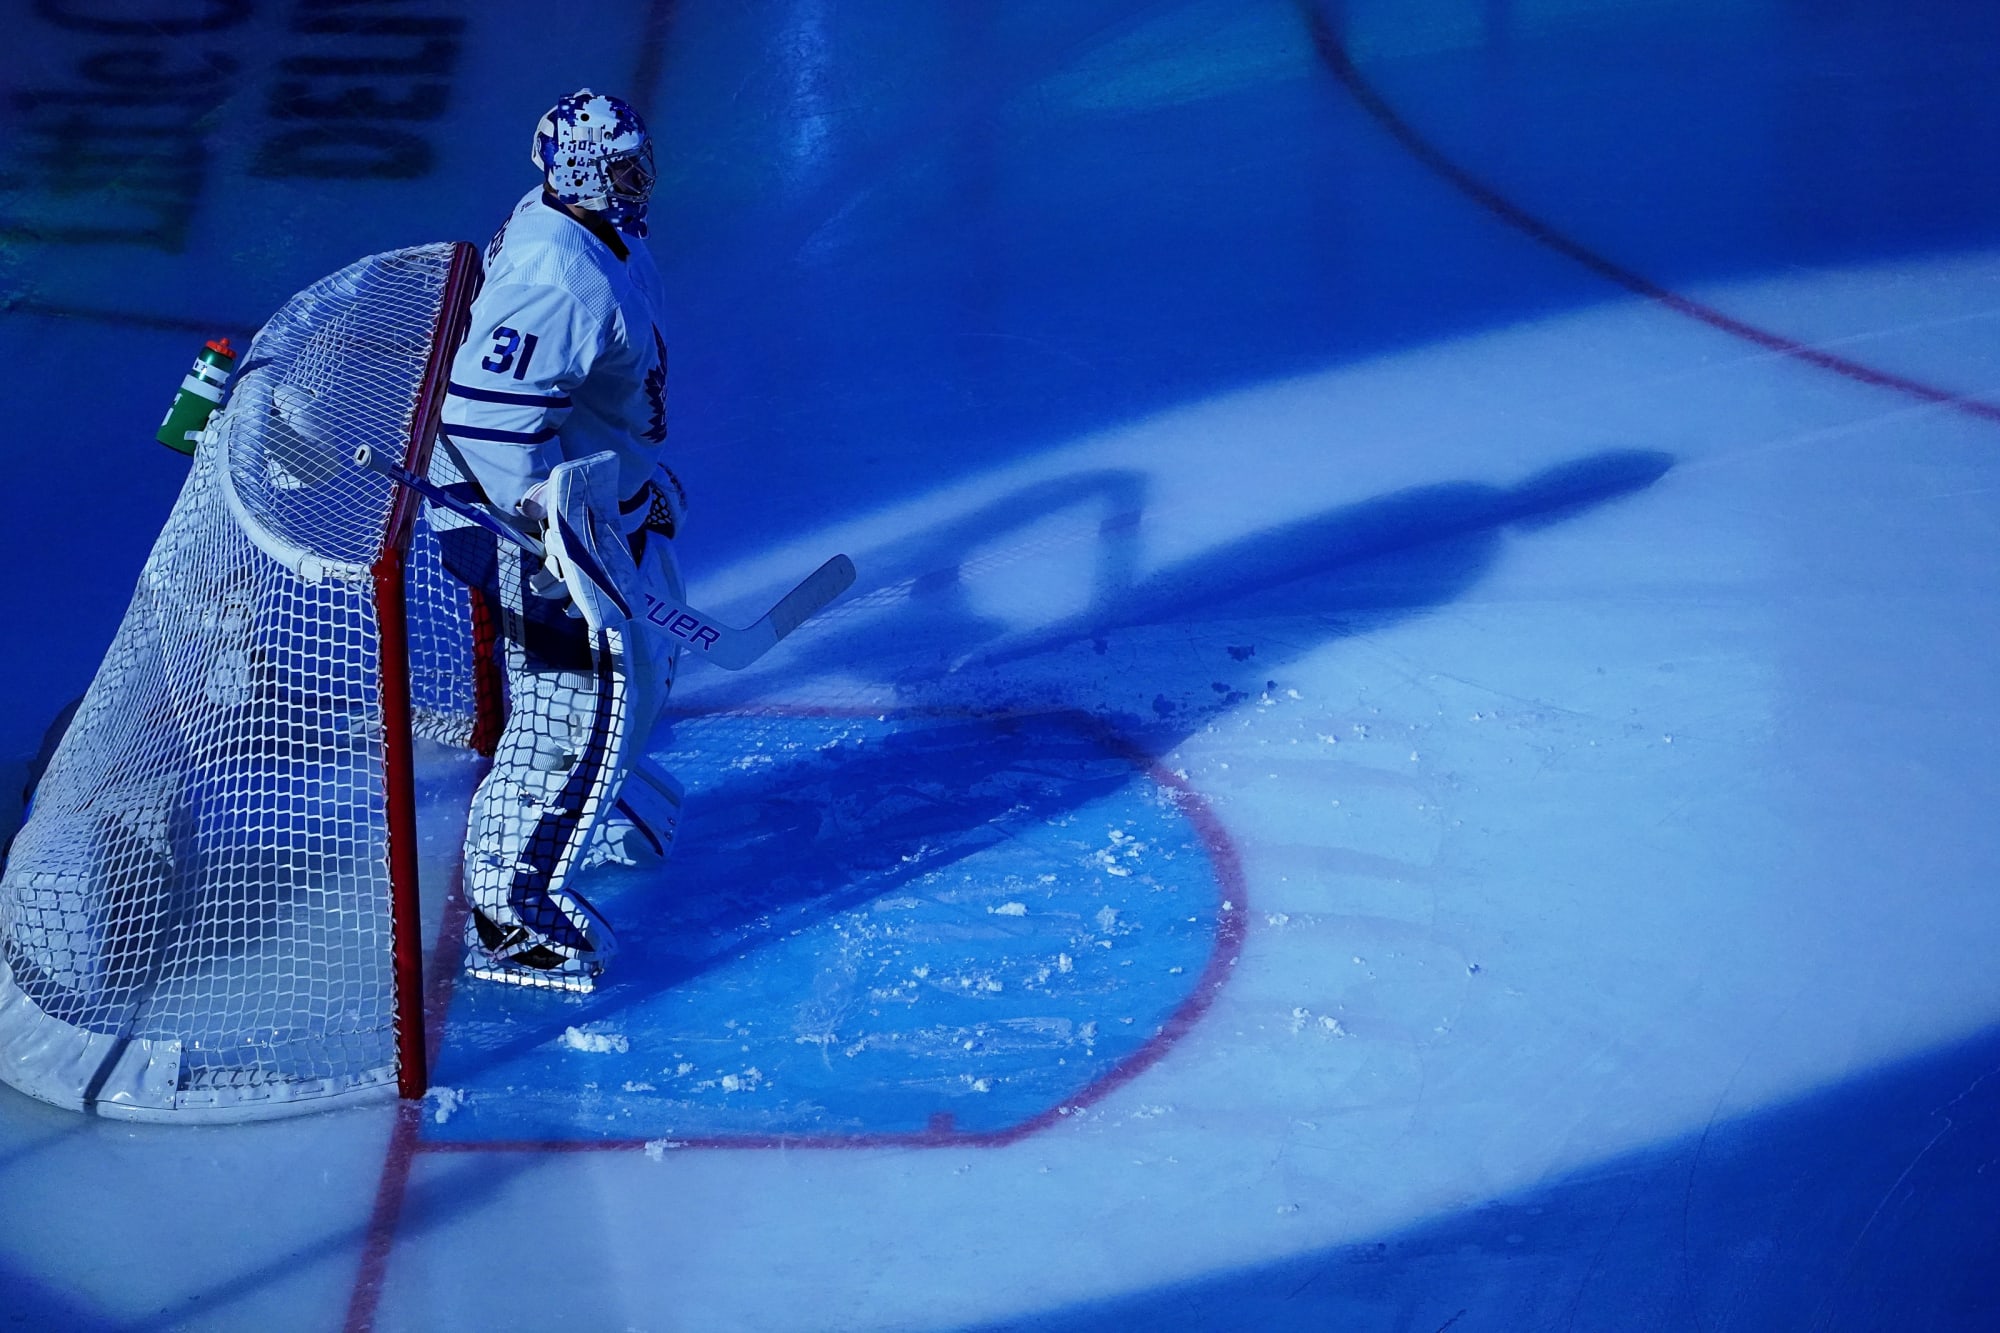 The Leafs' Goaltending Depth for the Upcoming Season